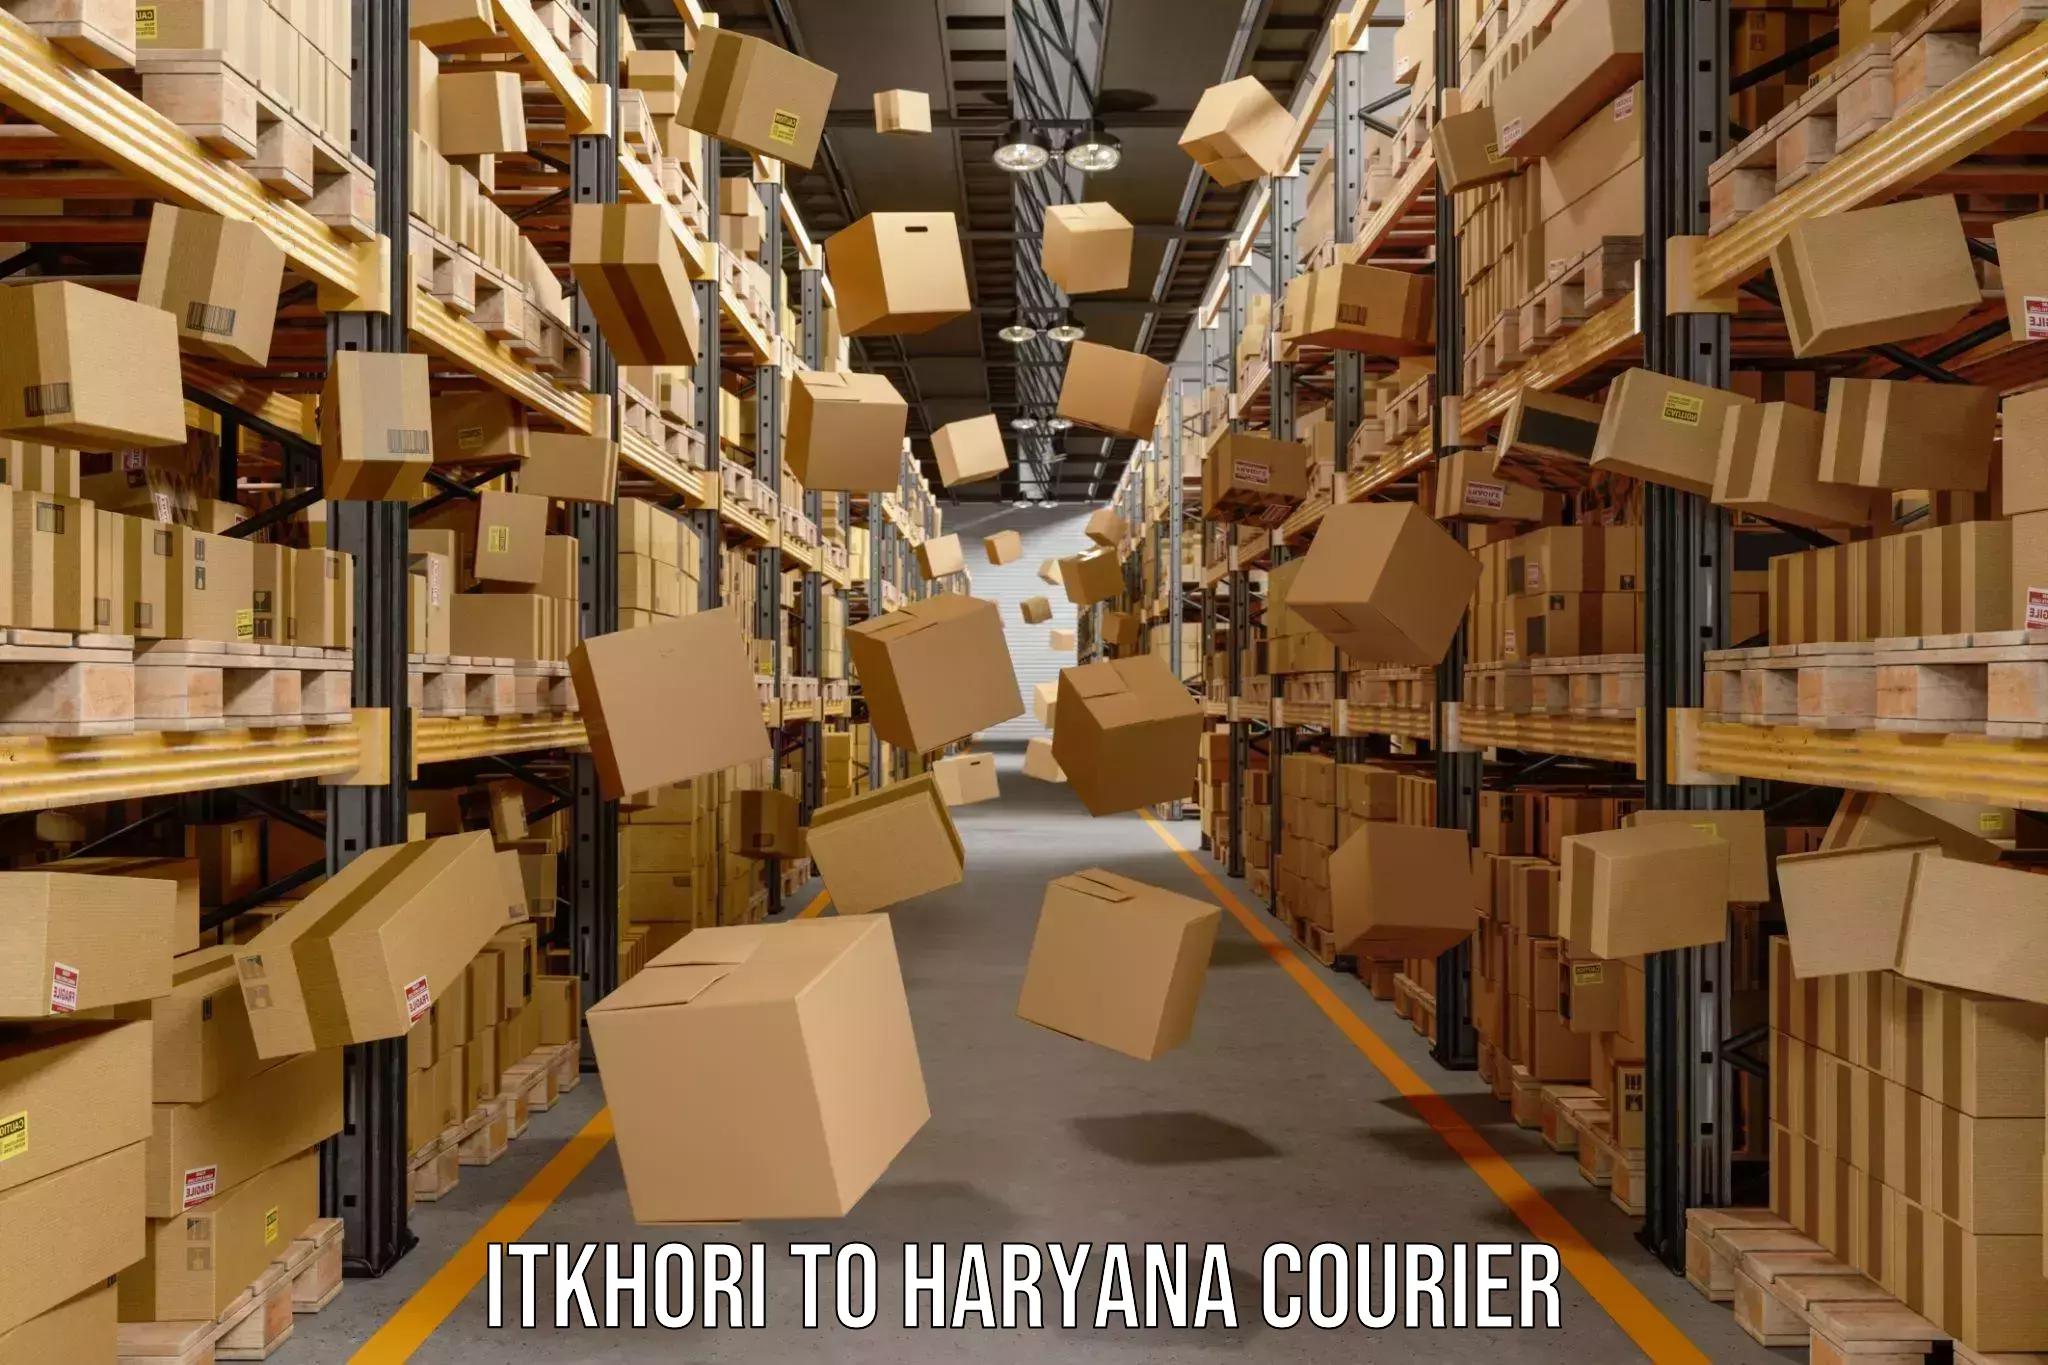 24-hour courier services Itkhori to Chaudhary Charan Singh Haryana Agricultural University Hisar